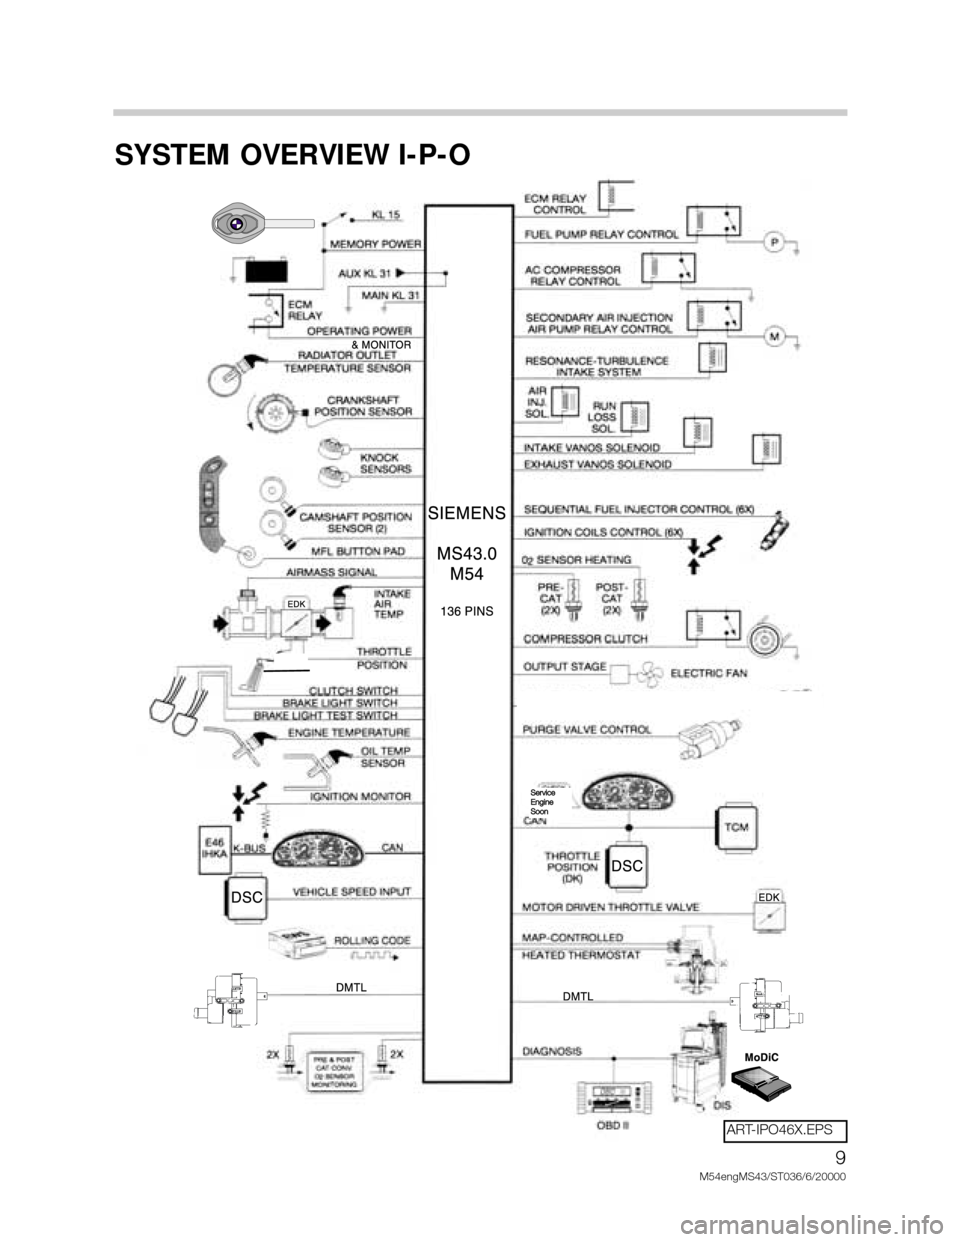 BMW X5 2000 E53 M54 Engine Workshop Manual 9
M54engMS43/ST036/6/20000
SYSTEM OVERVIEW I-P-O
Service 
Engine
Soon
ART-IPO46X.EPS 